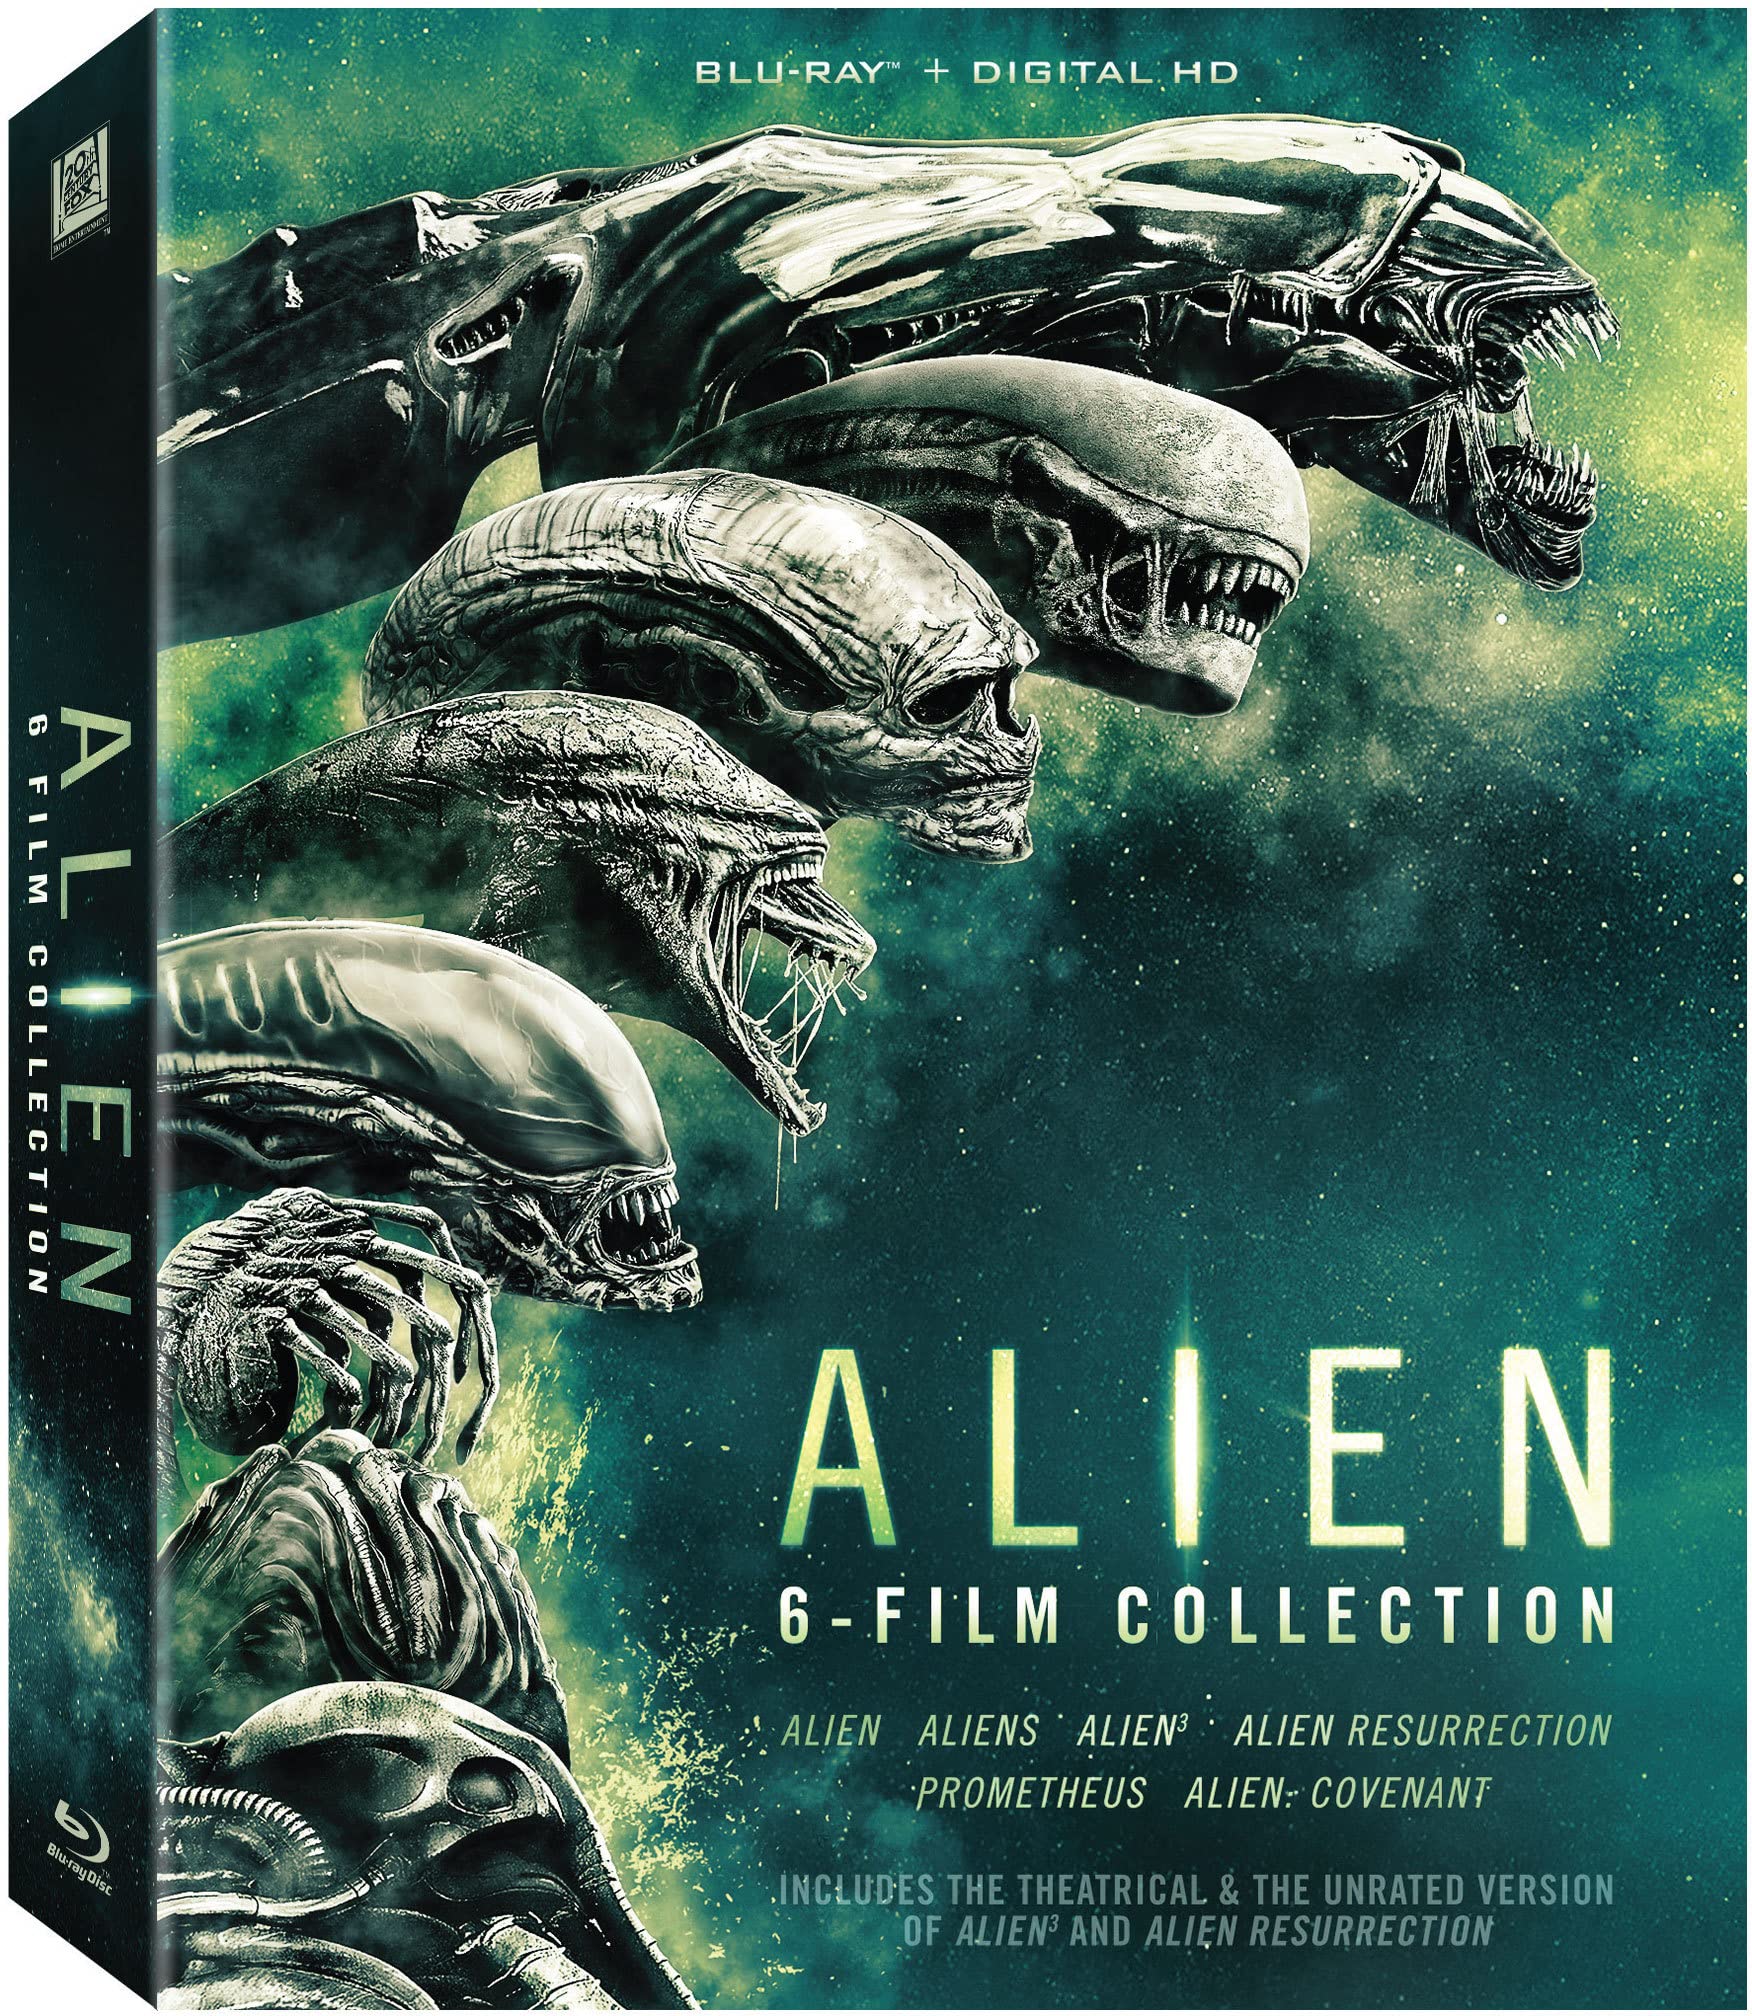 Book Cover Alien 6-film Collection [bd + Dhd]